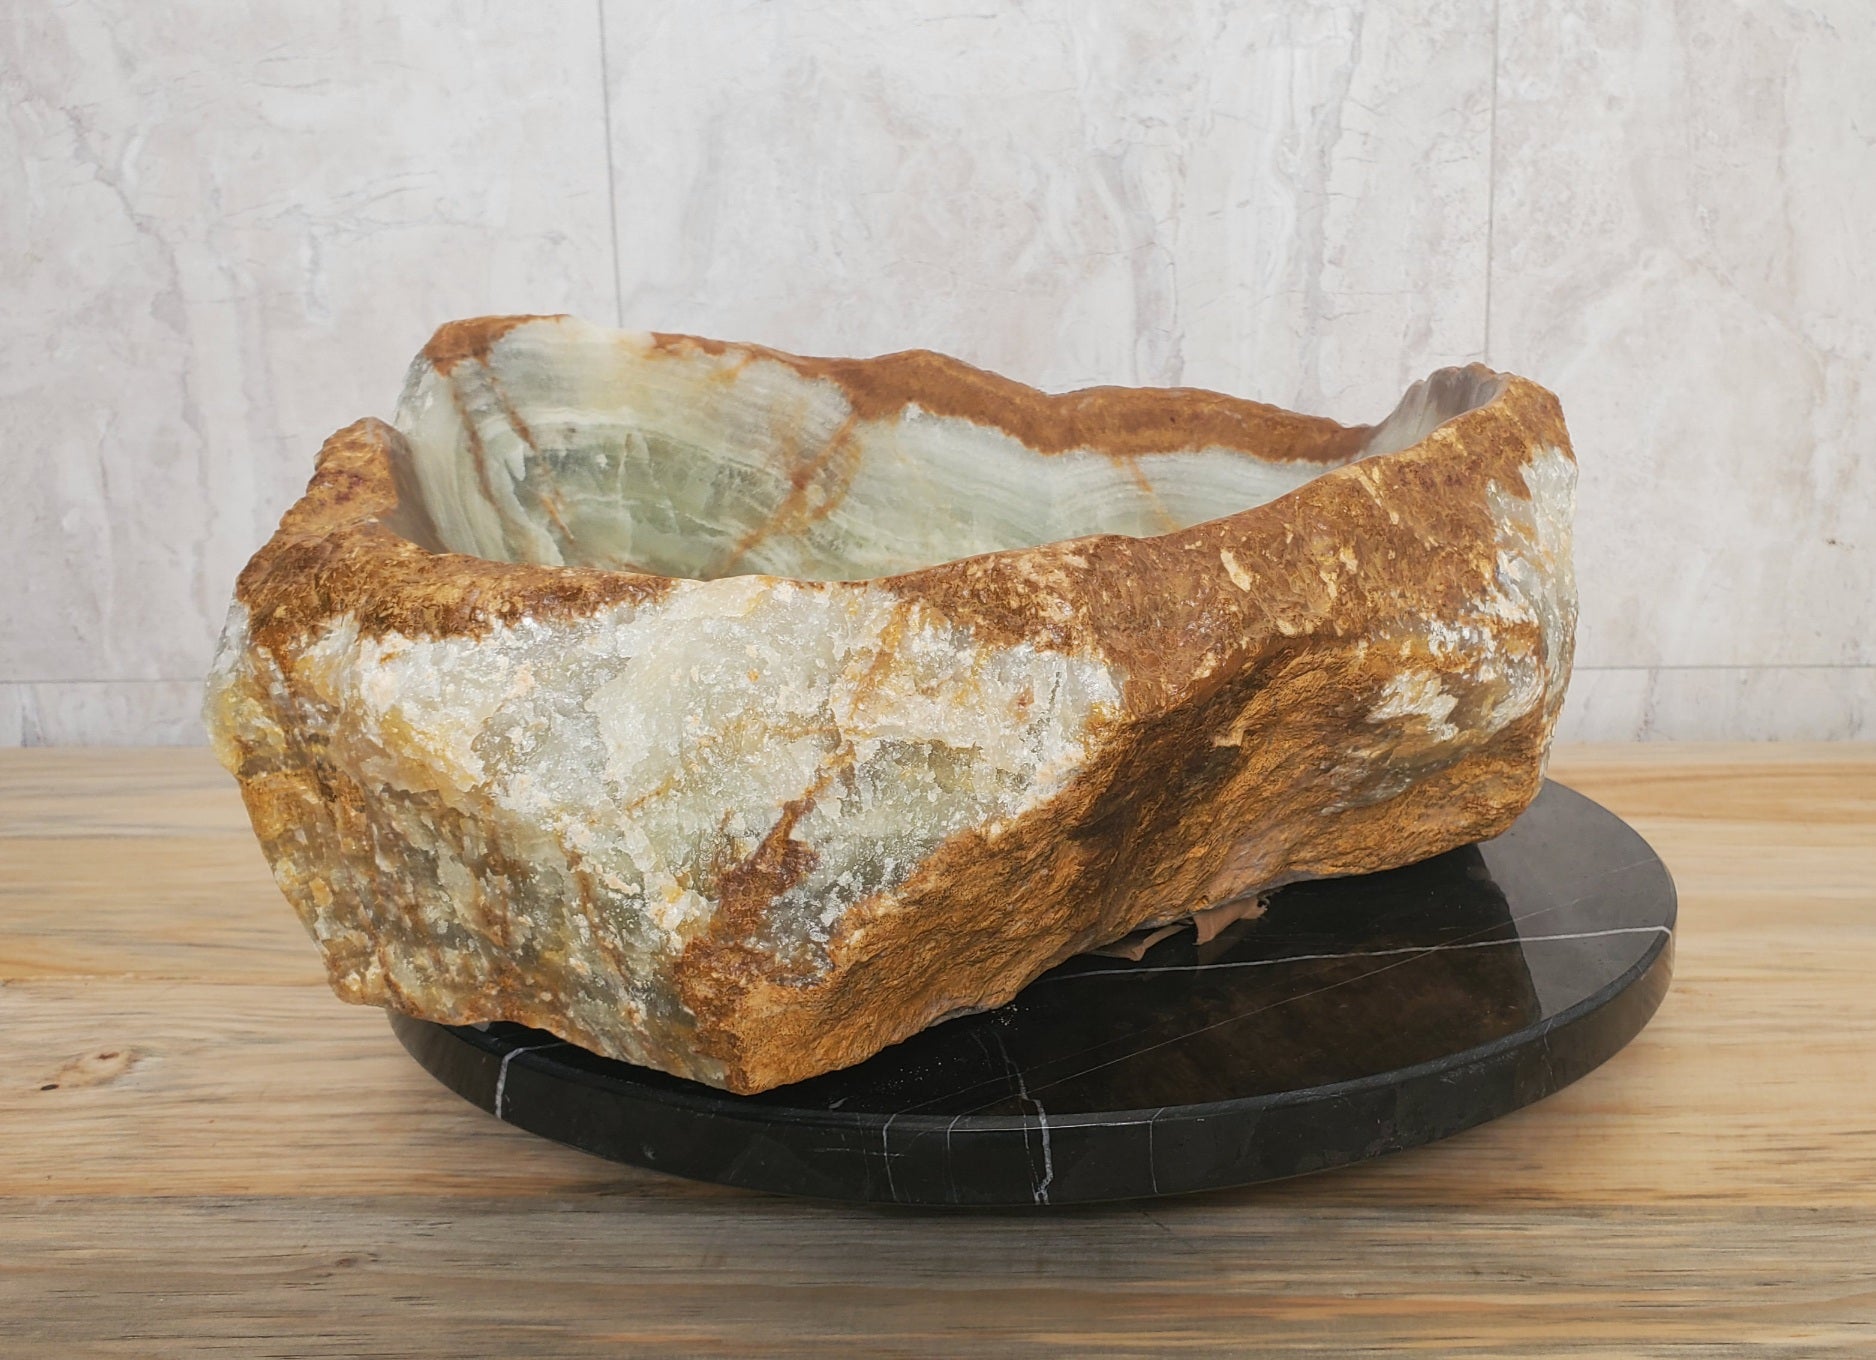  Green Onyx Stone Bathroom Vessel Sink. Epoxy Sealant is available with fast shipping. Standard drain size. A beautiful work of art. Handmade. Buy Now at www.felipeandgrace.com.